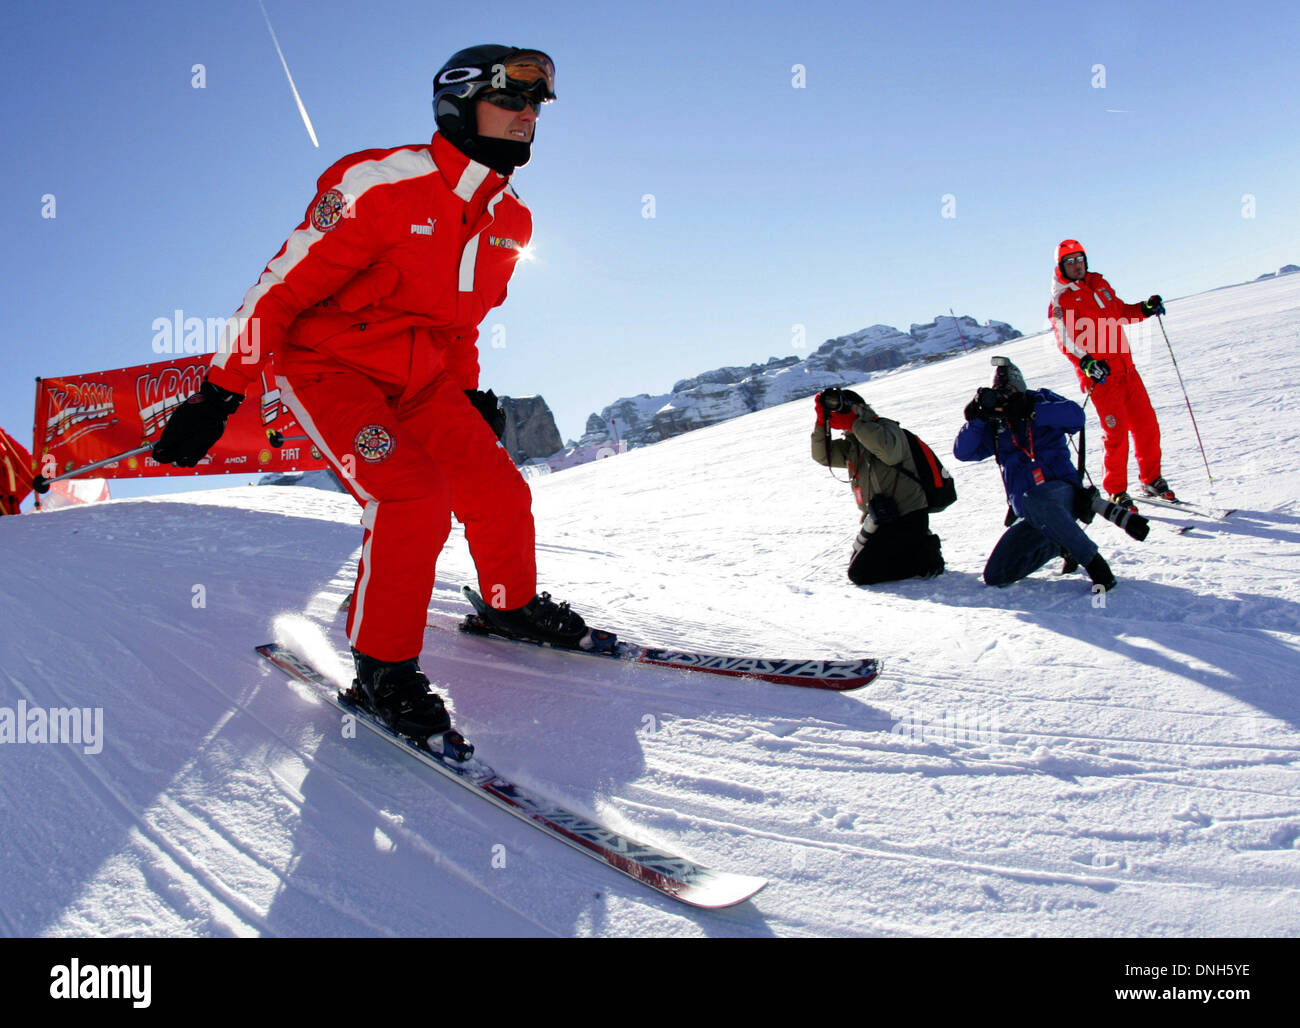 FILE: German Formula One driver Michael Schumacher gets into carving position as he takes part in a 'Giant Slalom Ski Race' in Madonna di Campiglio, Italy, late Thursday 12 January 2006. Traditionally, in the beginning of the year the Ferrari team and the drivers spend one week of skiing themed 'Wrooom'. Photo: Rainer Jensendpa/Alamy Live News Stock Photo